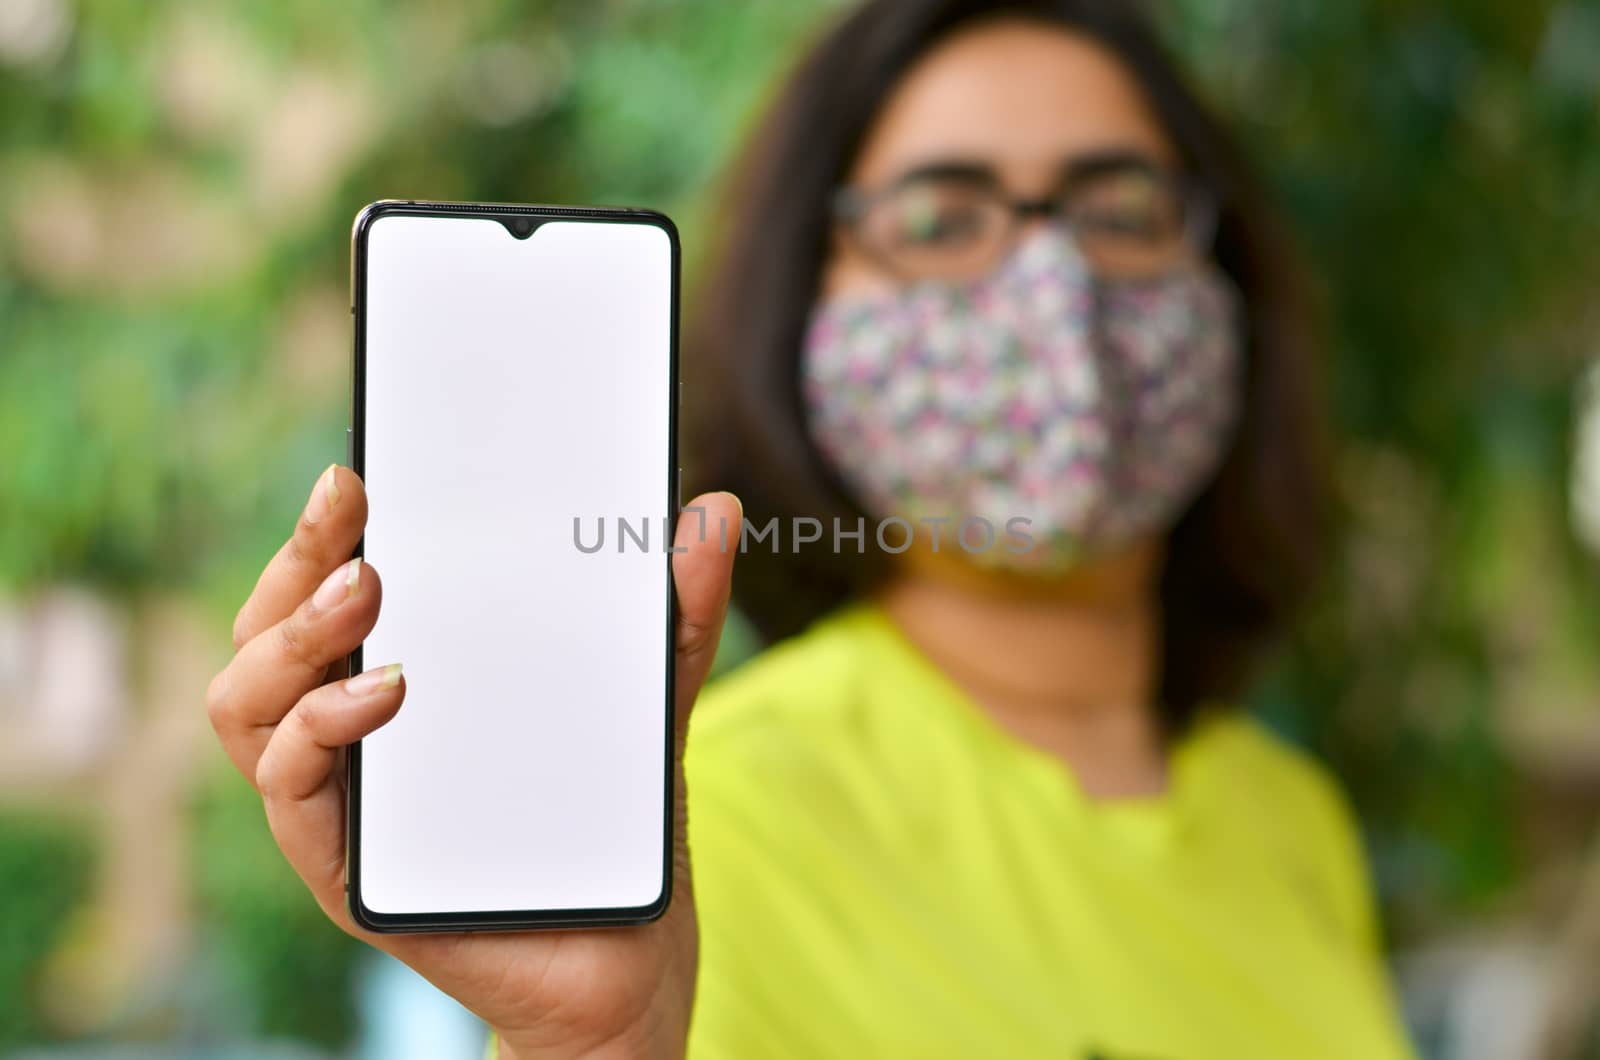 Young woman showing her blank mobile phone white screen against yellow background which can be used for copy space for different apps. Concept Happy smartphone user - blank screen for advertising